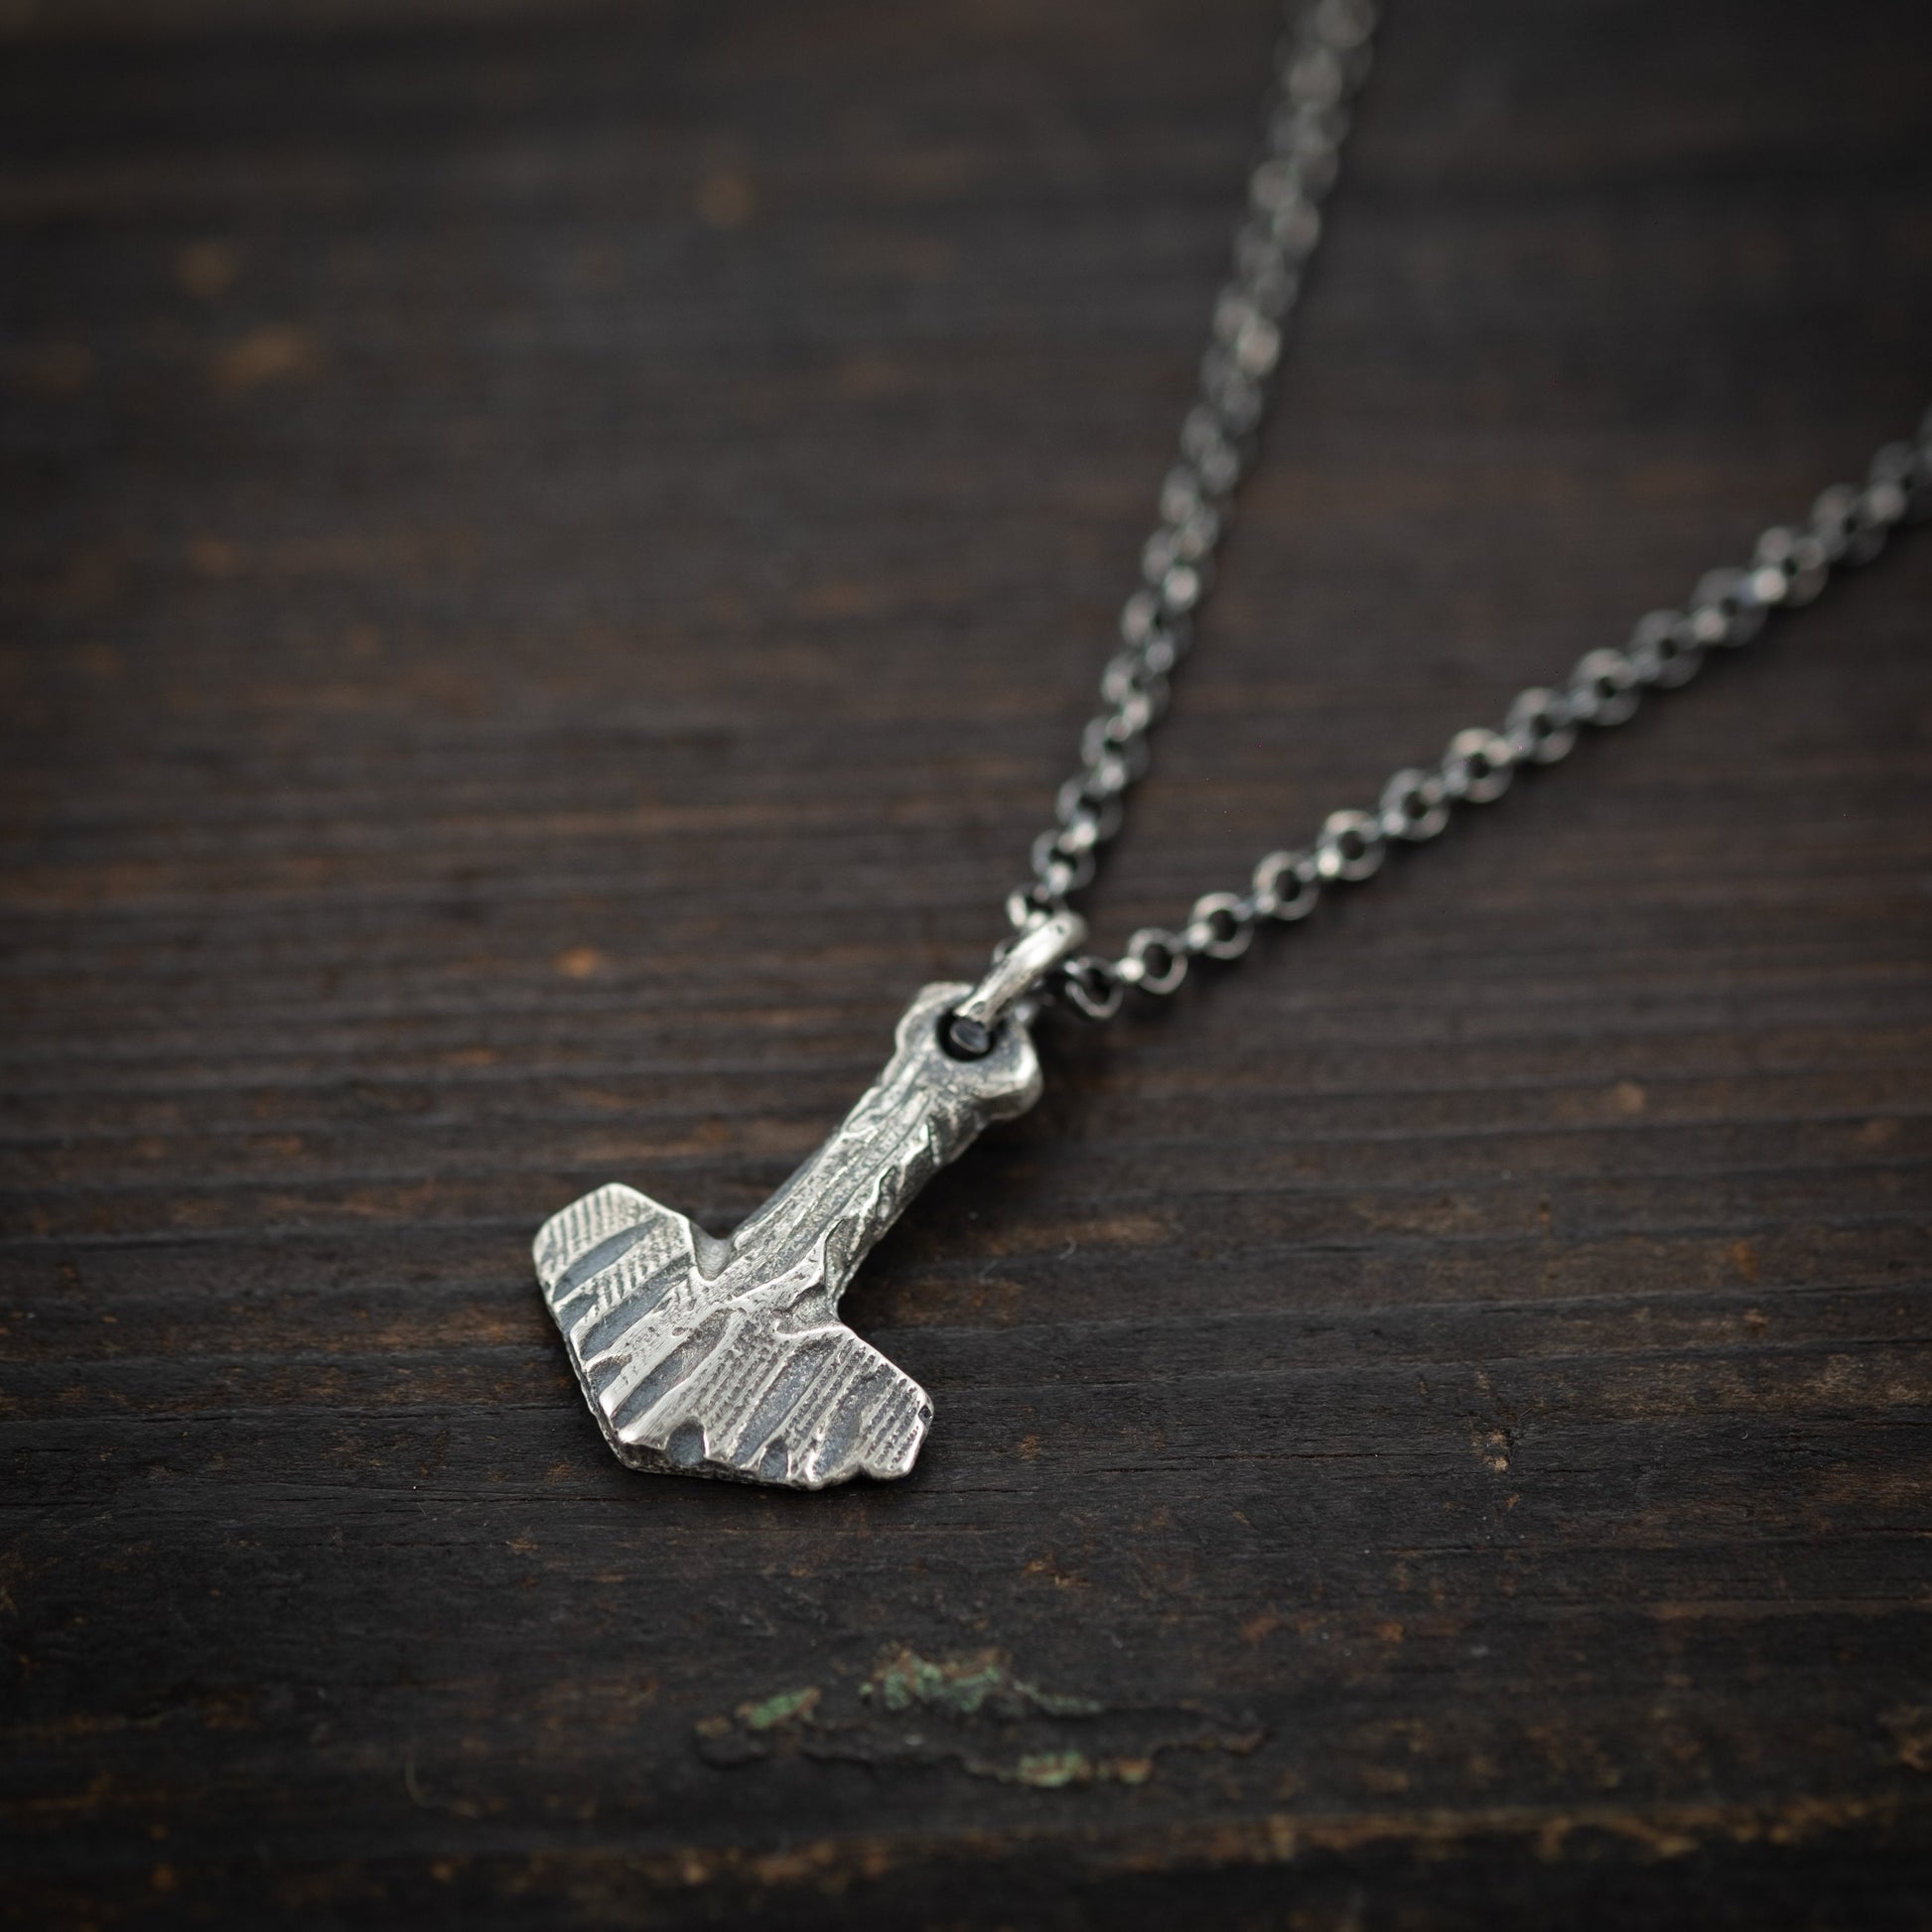 Thors hammer Silver Pendant, Viking jewelry, Mjolnir war hammer necklace, Gift for him, Boyfriend Christmas gifts, Norse jewelry, mens gift